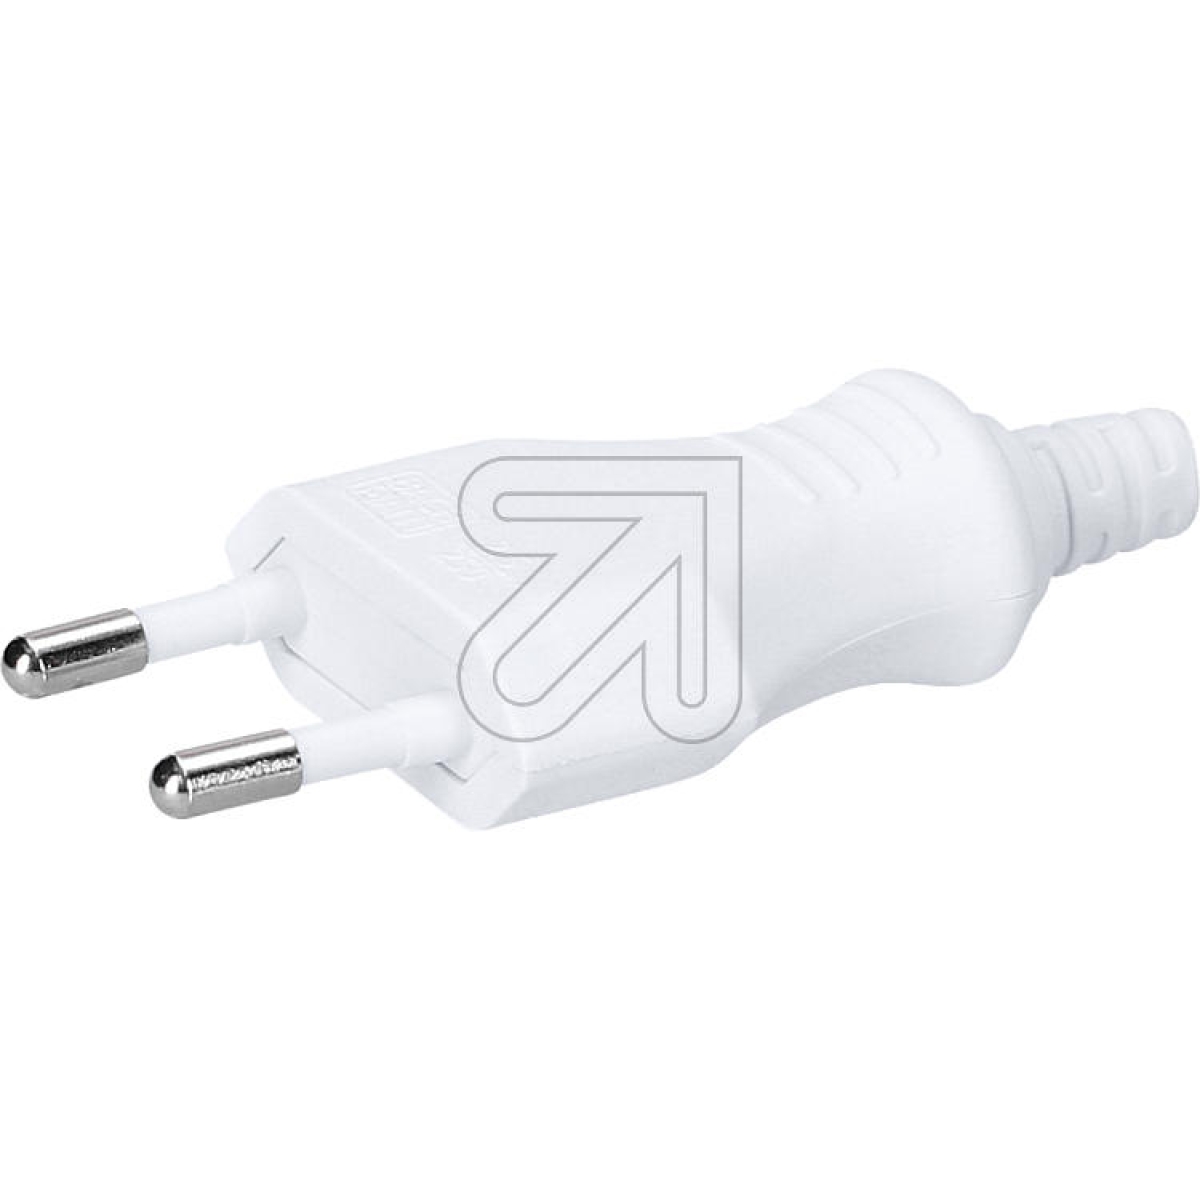 BachmannEuro flat plug white 900.003 with screw connection-Price for 10 pcs.Article-No: 061130